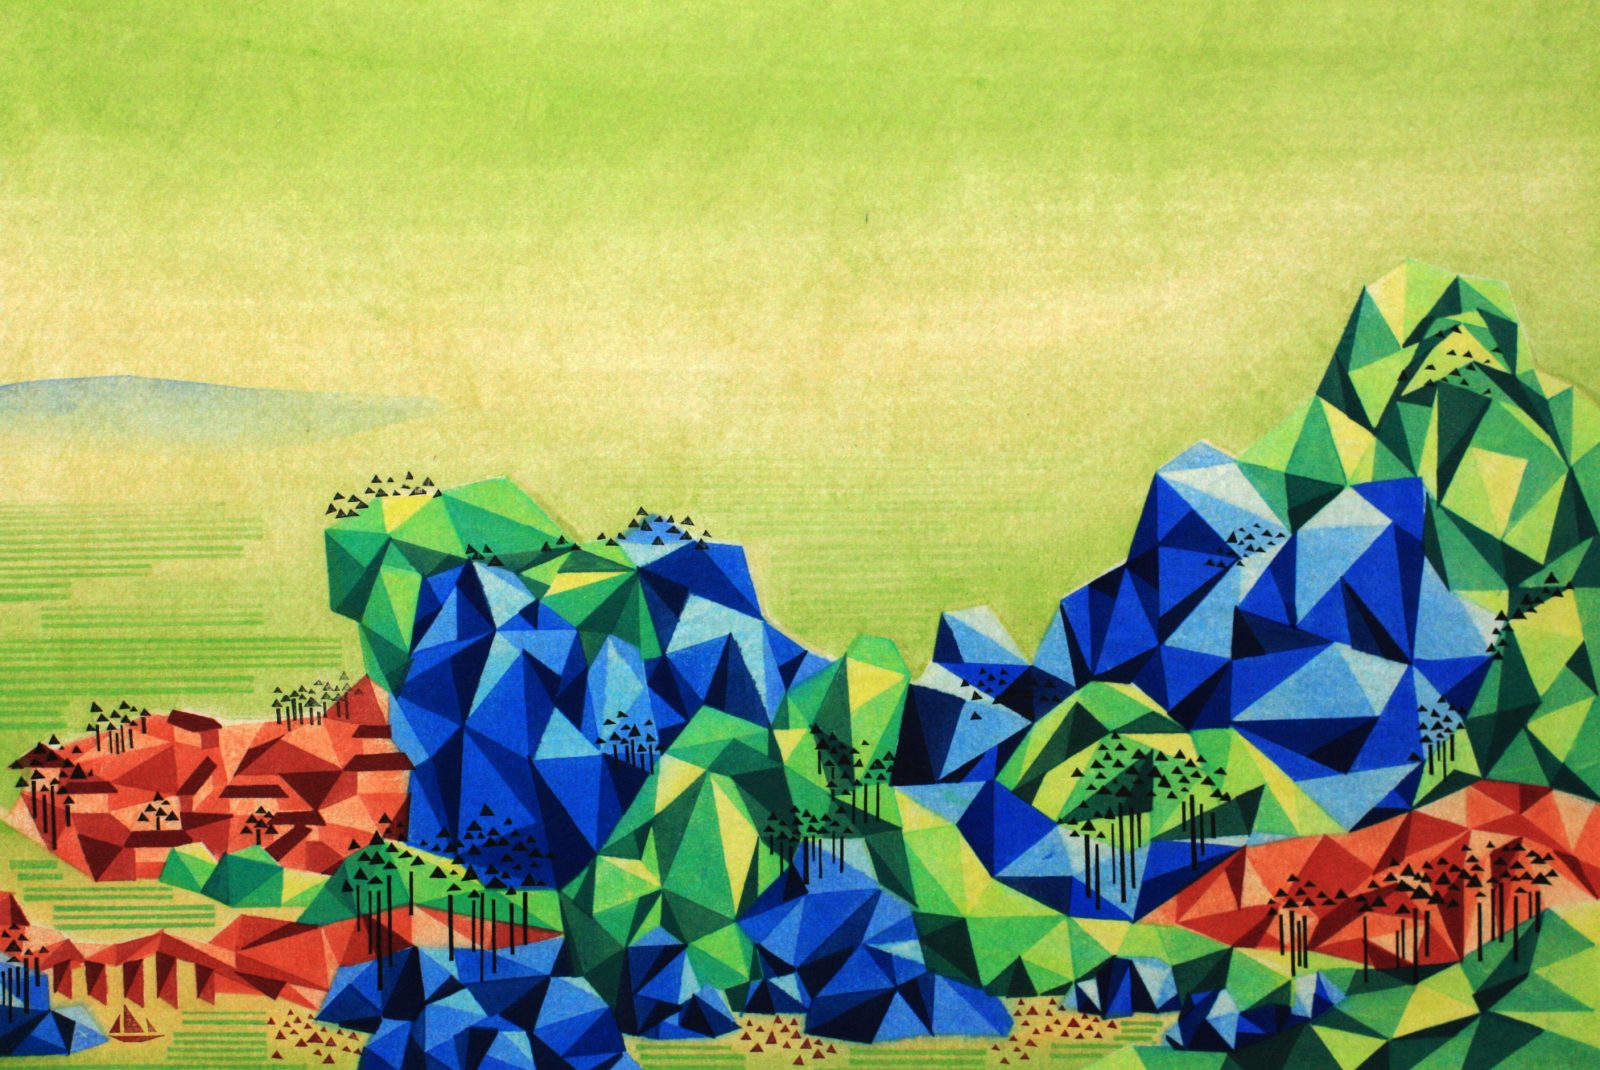 Reconstructed Landscape I 重构山水-1,50cm×75cm, Waterbased Woodcut 2014